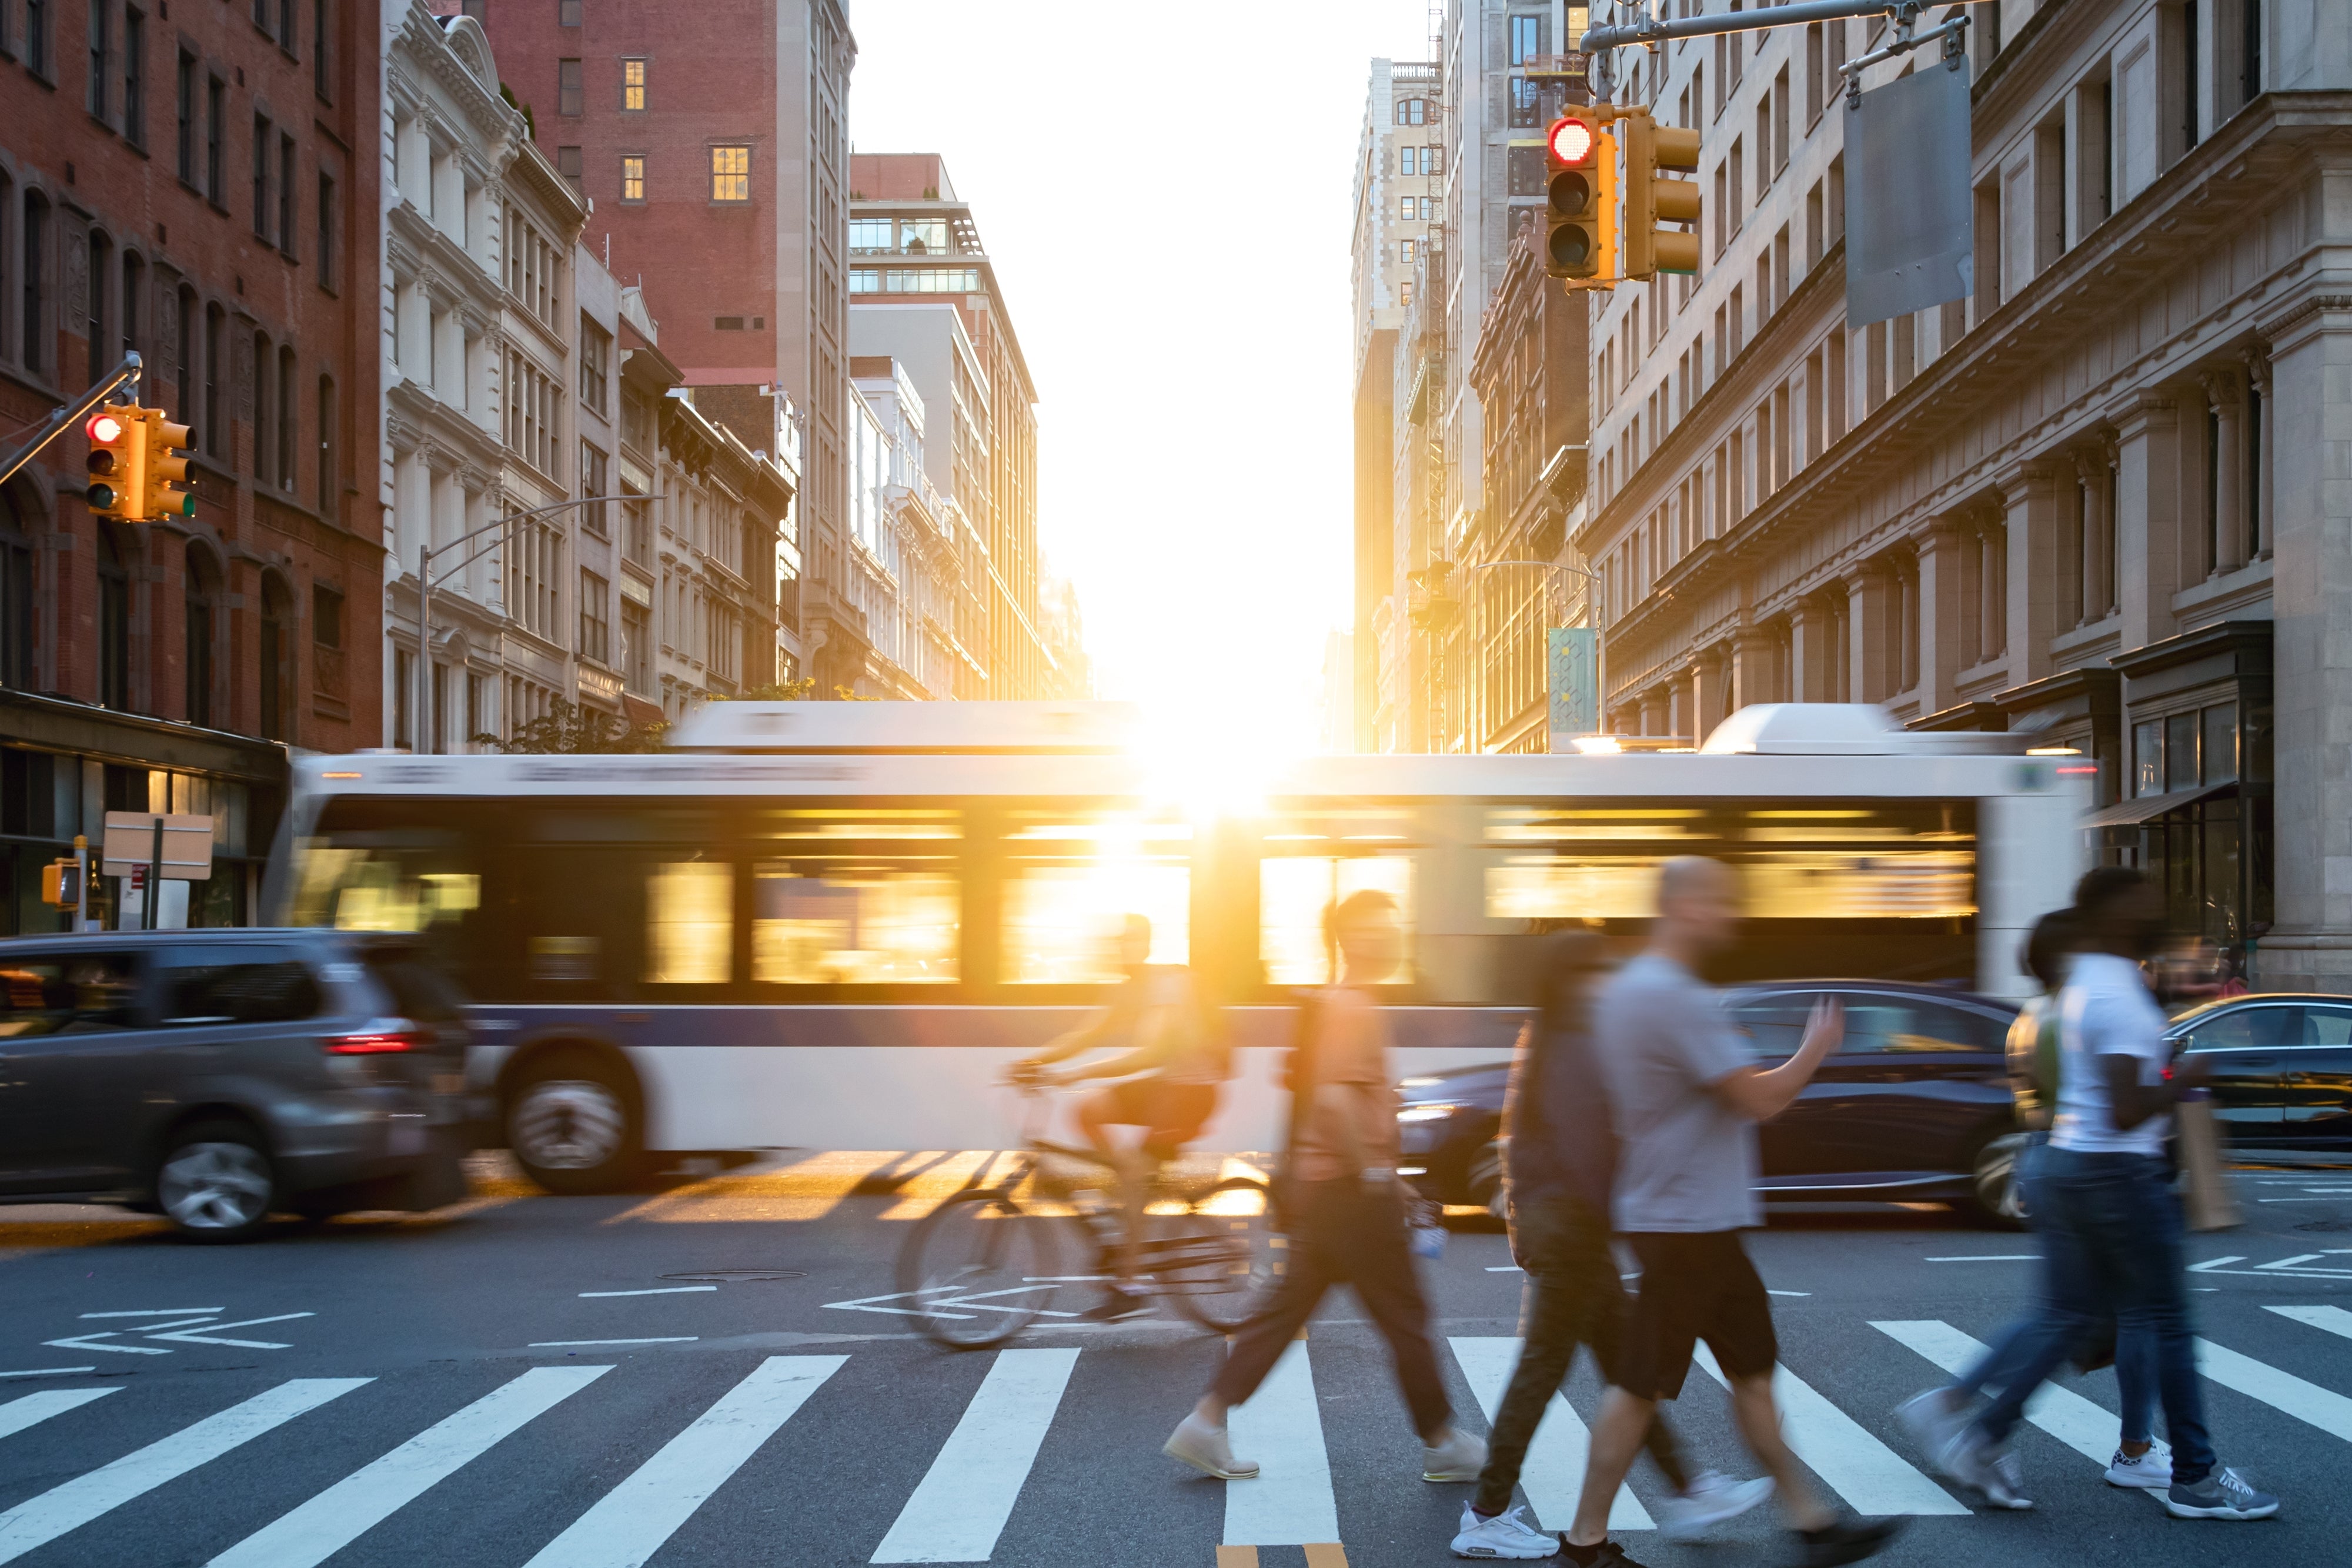 Sun shining through a city bus with cars, bicycles, and pedestrians crossing in front of the camera view